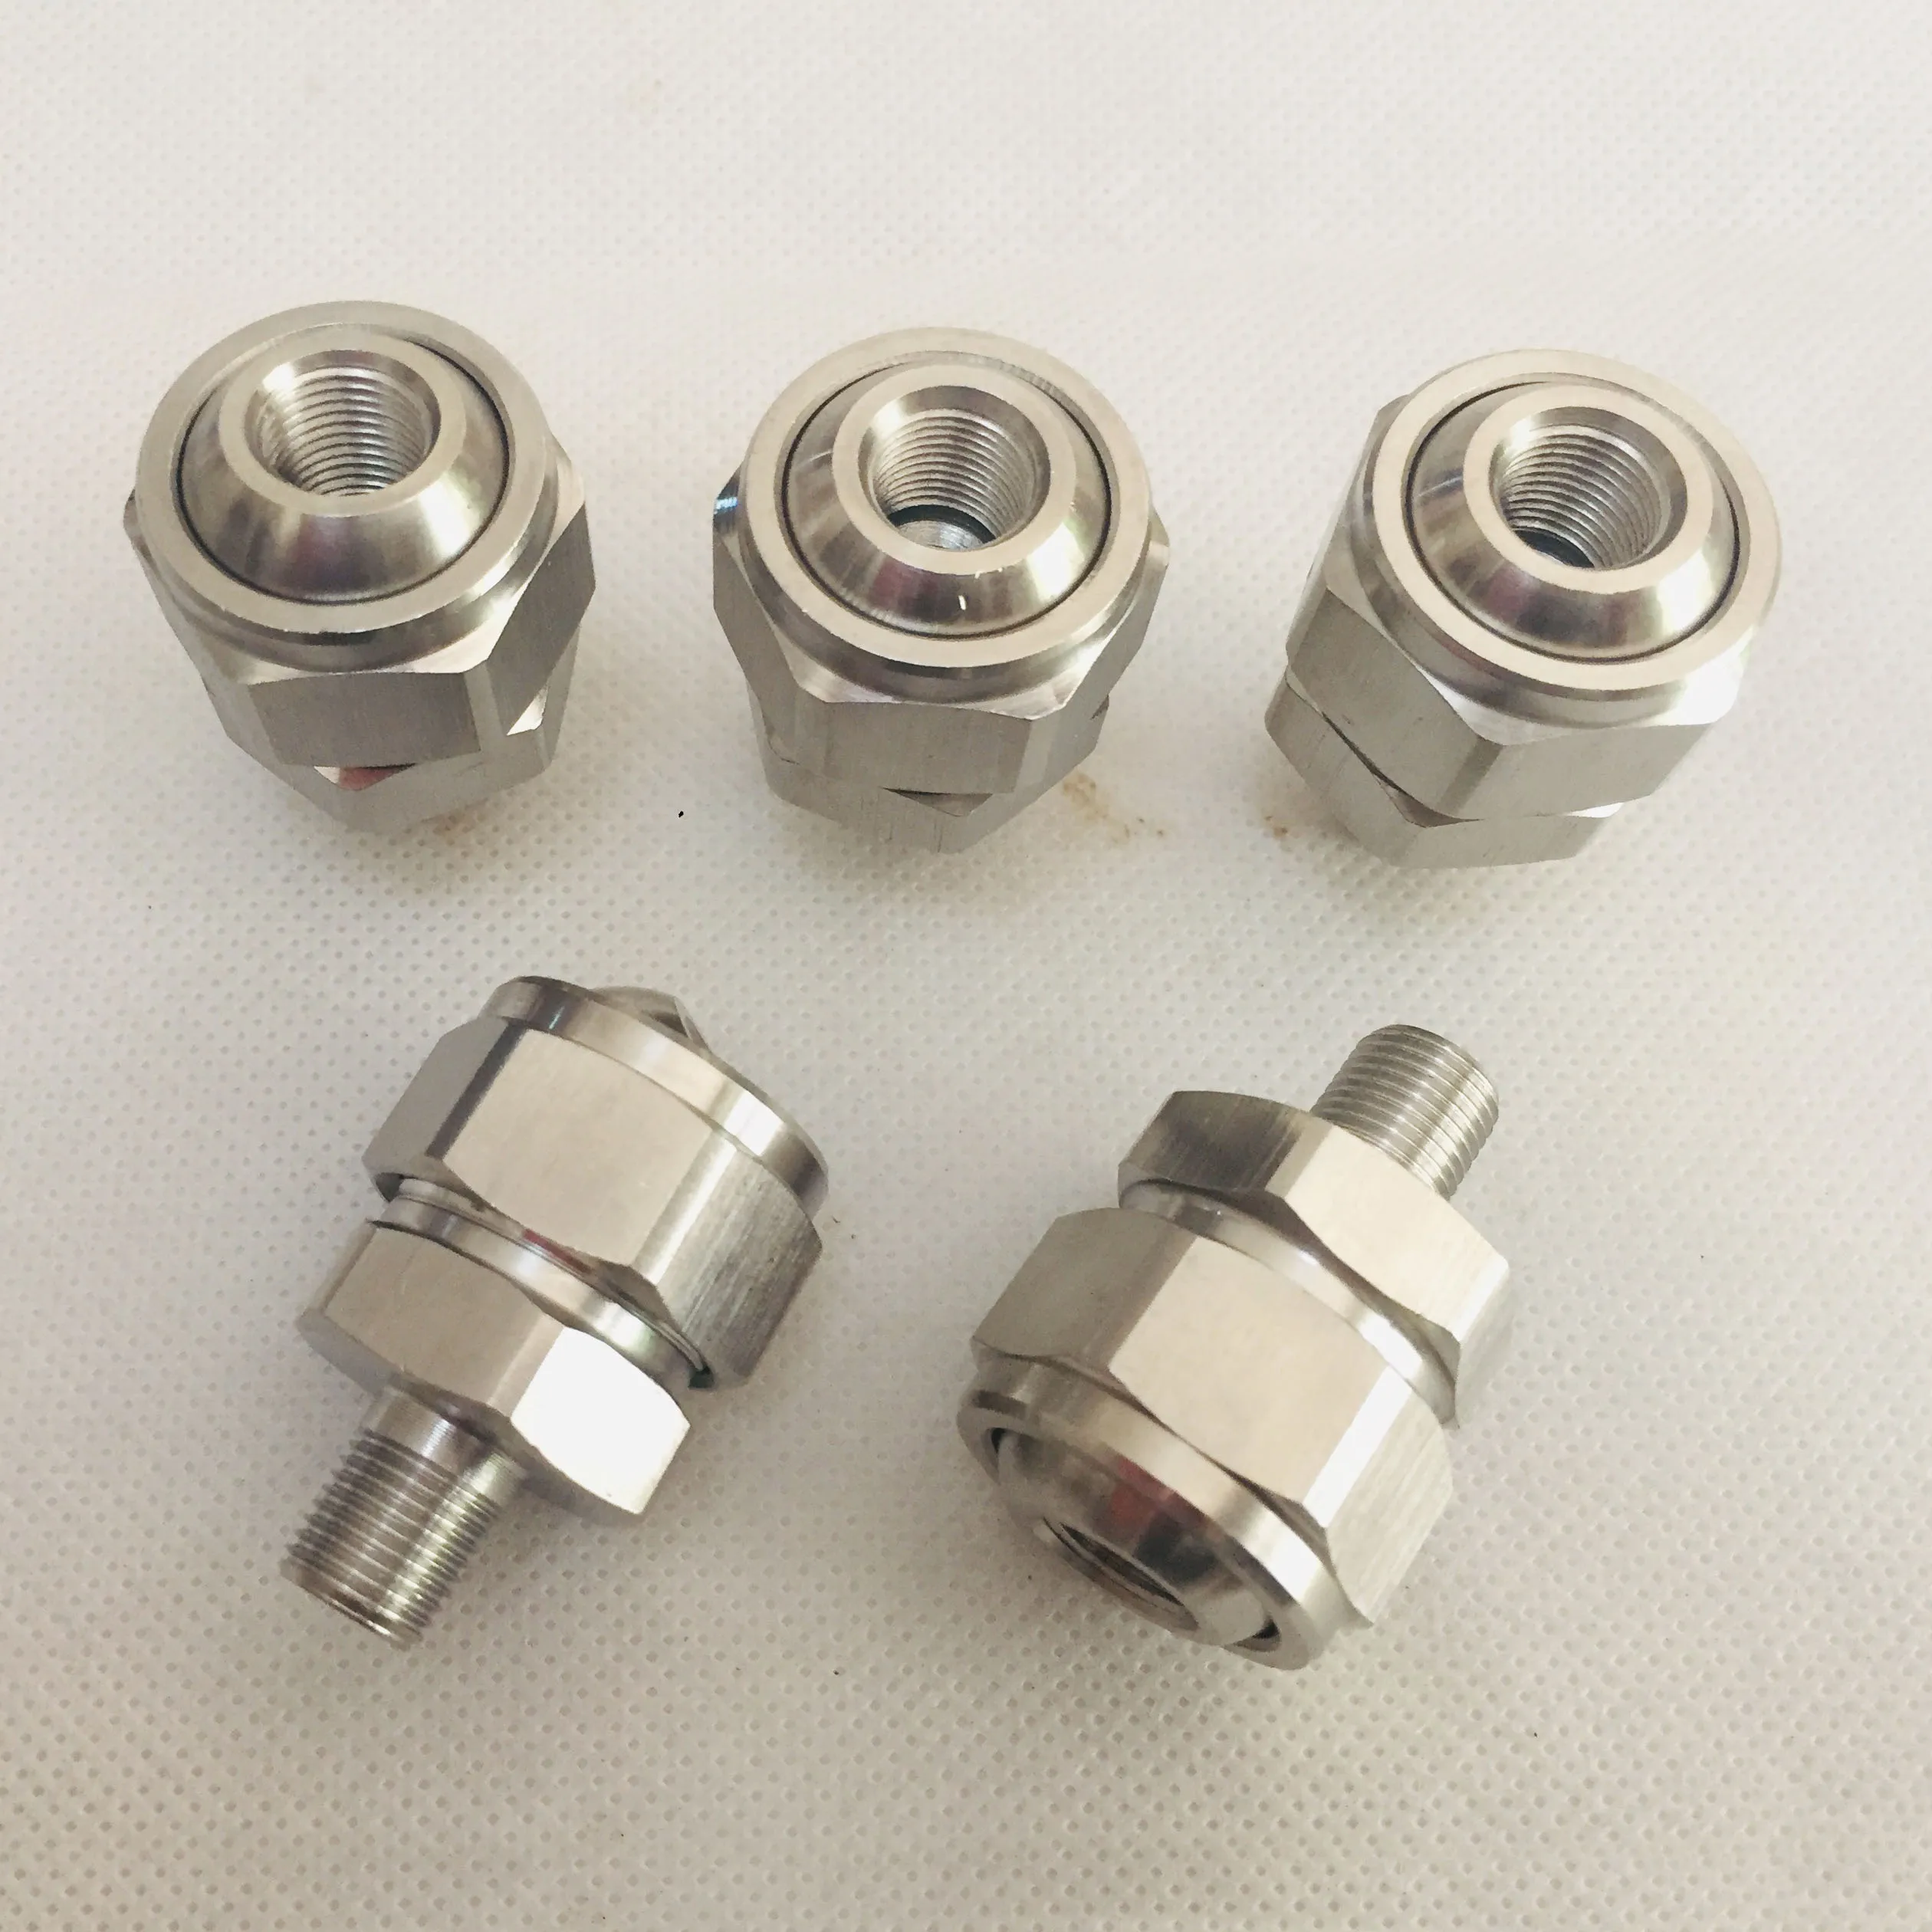 ( 5 pcs/lot ) Stainless steel ball universal joint,155 adjustable ball fittings,connector,adjustable swivel ball joints